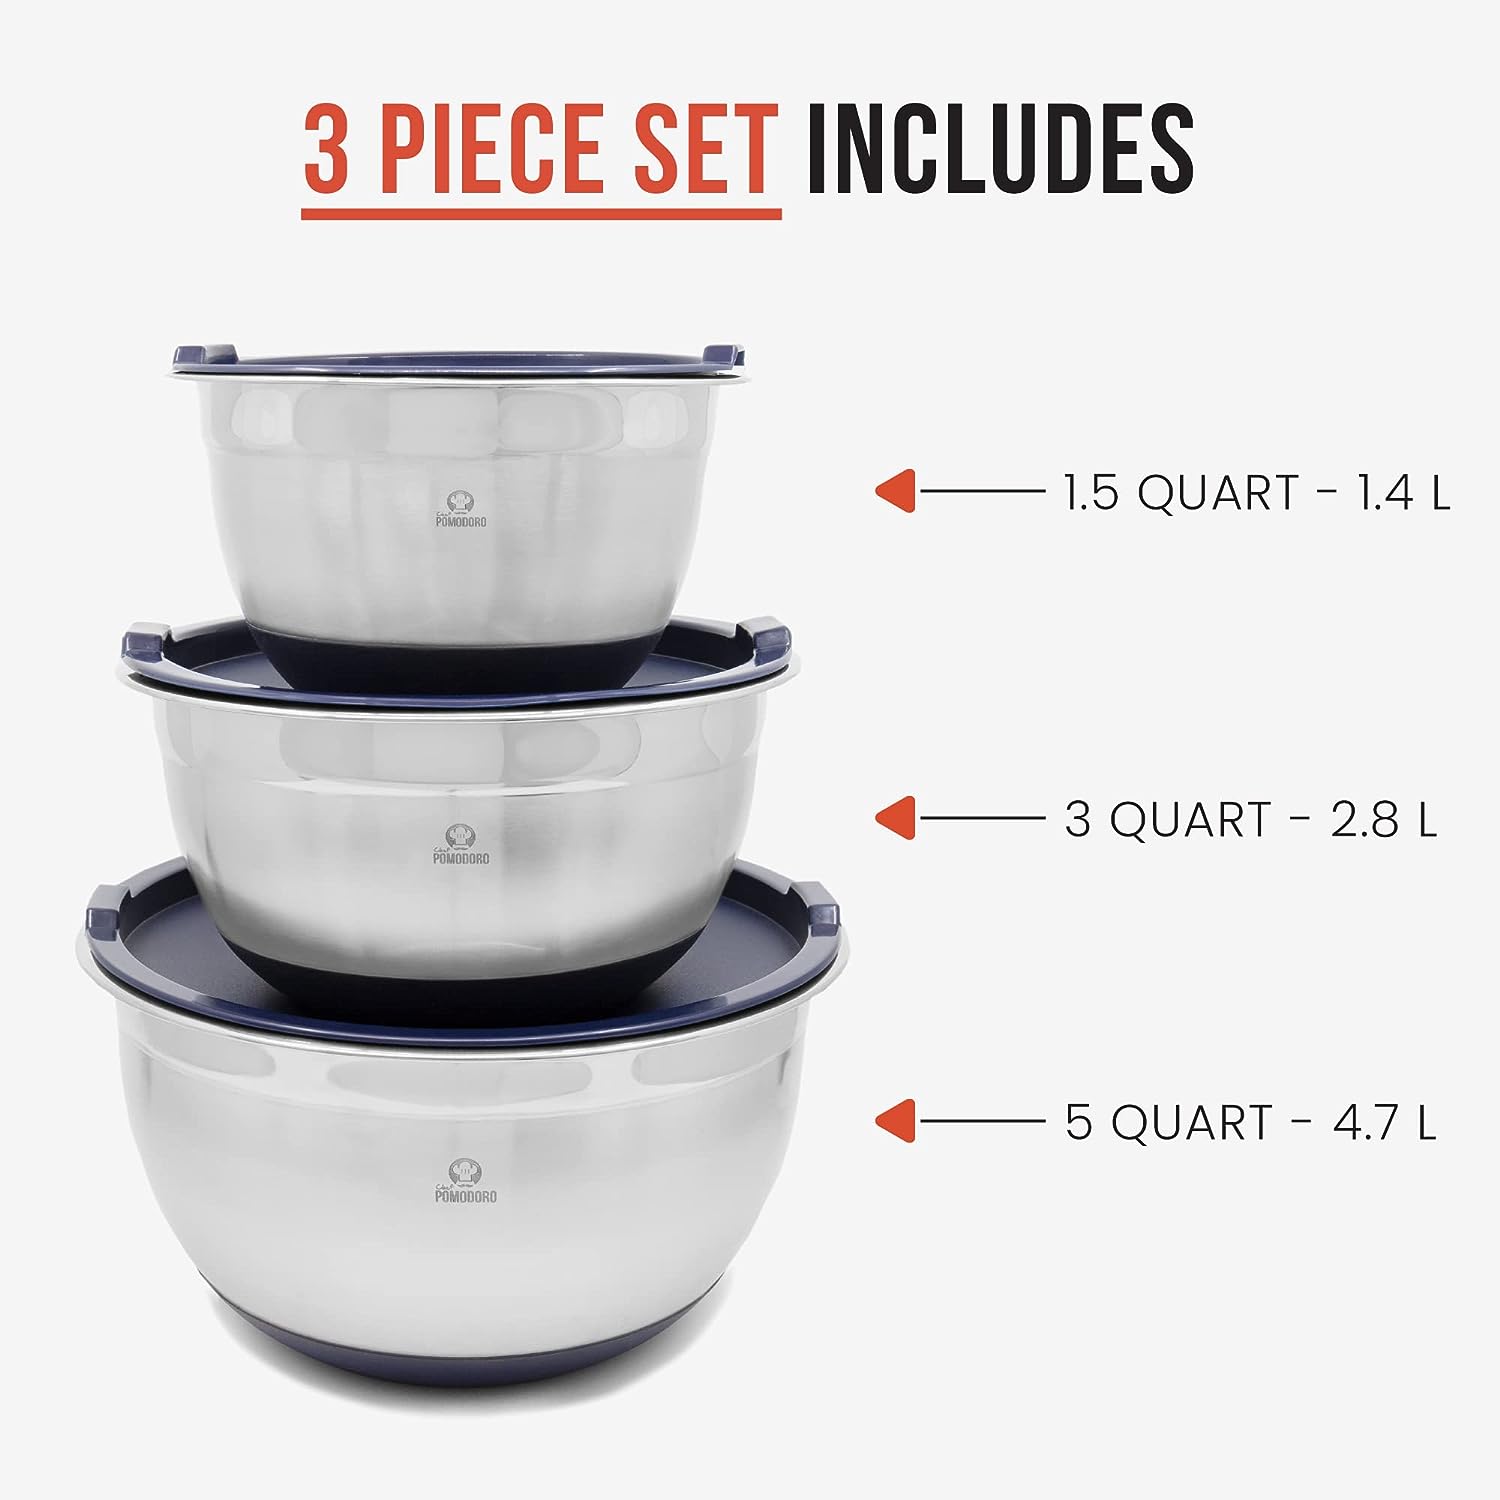 Ovente Premium Stainless Steel Mixing Bowls with Lids, Set of 3